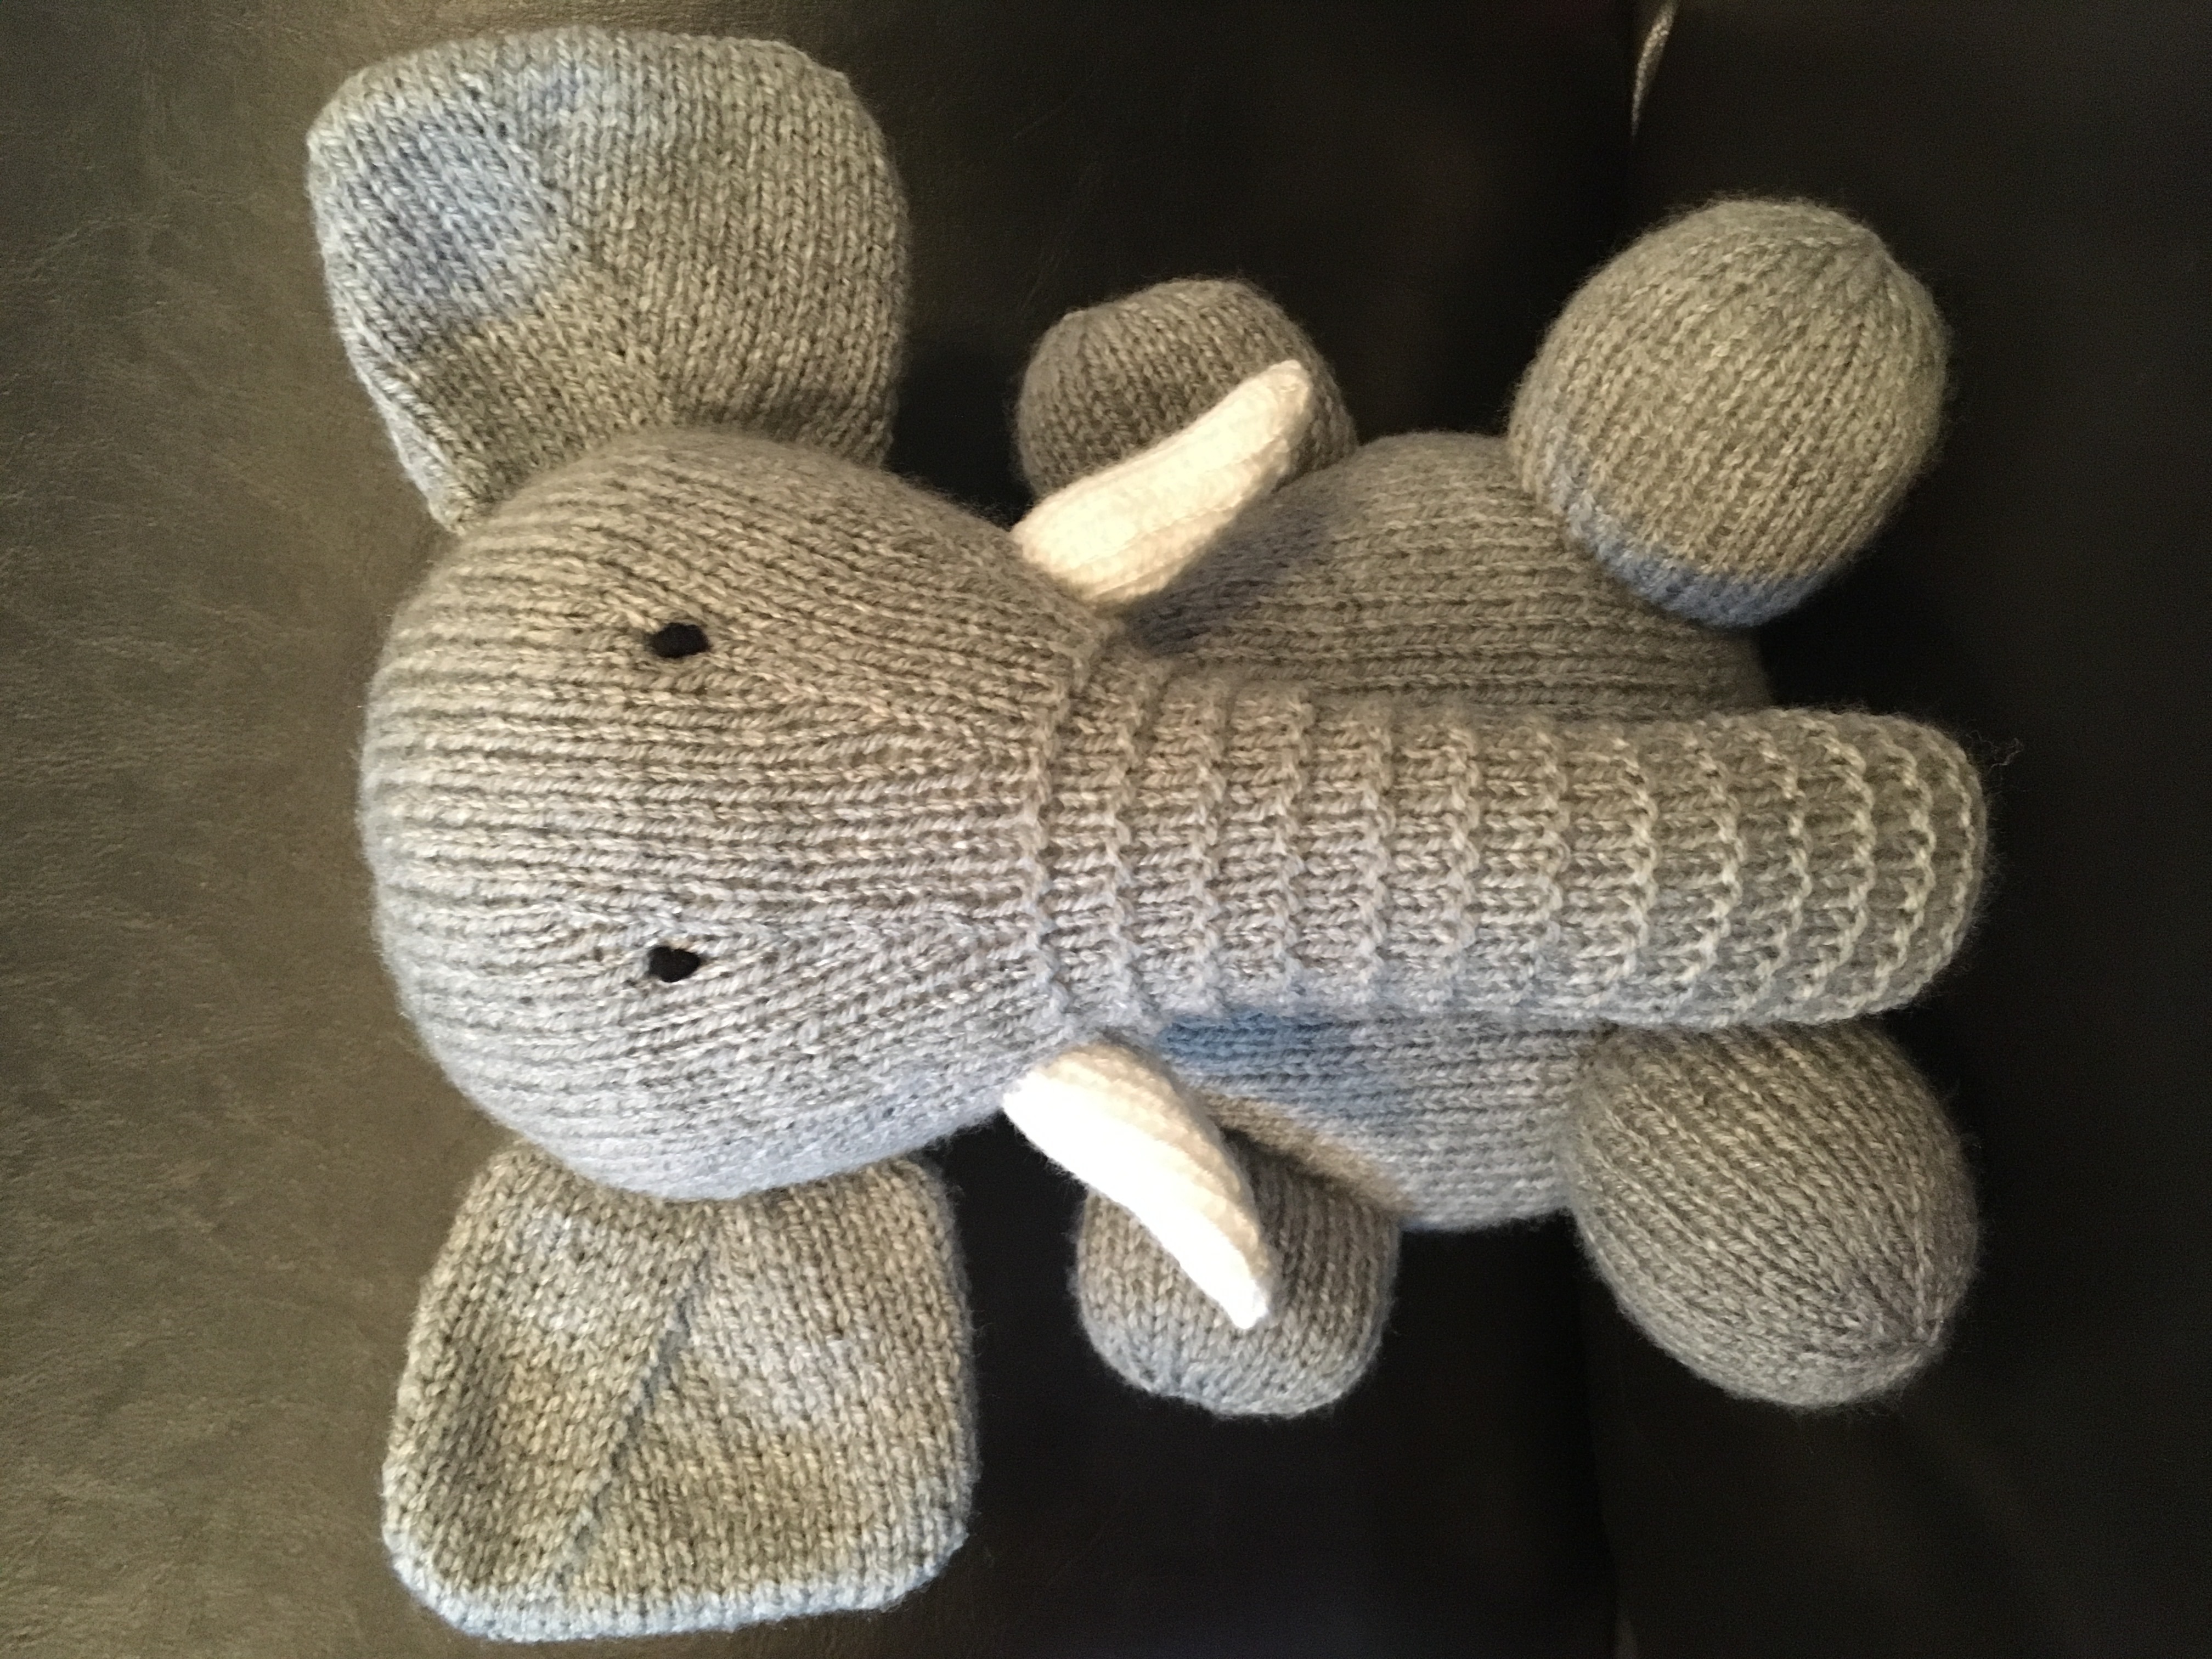 Elephant Toy knitting project by Lorna P LoveKnitting